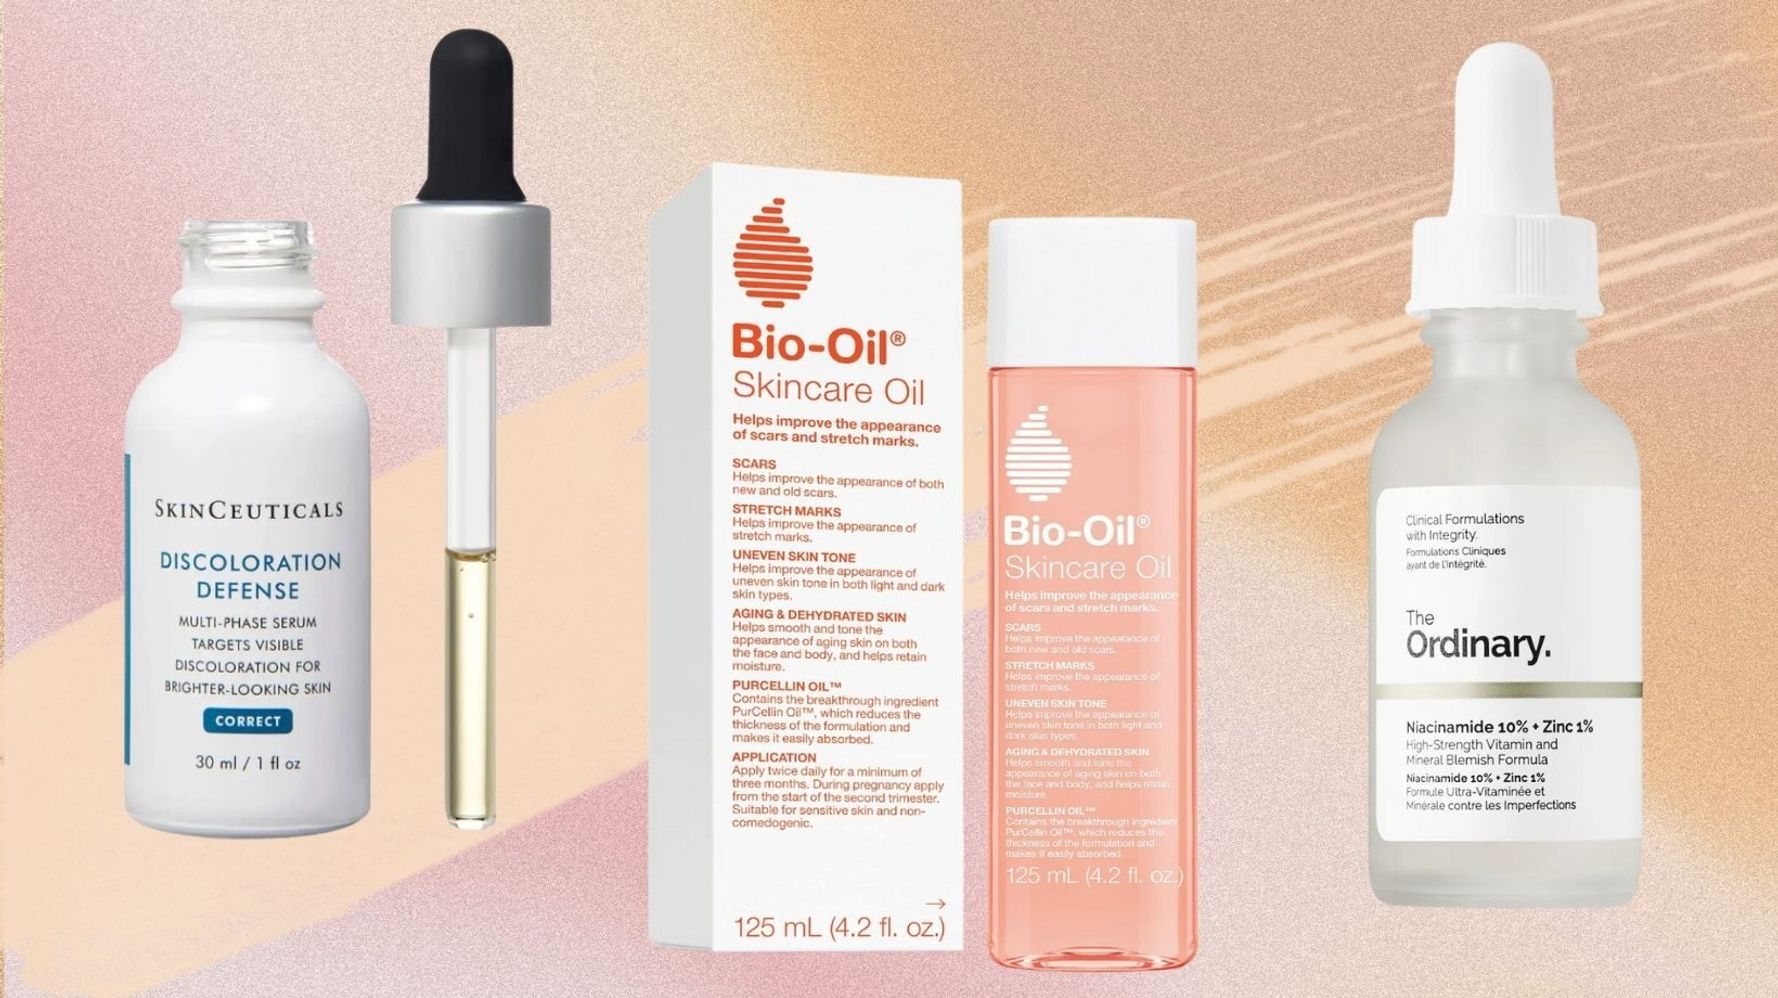 Stretch marks, scars and skin blemishes visible improvement- Bio-Oil